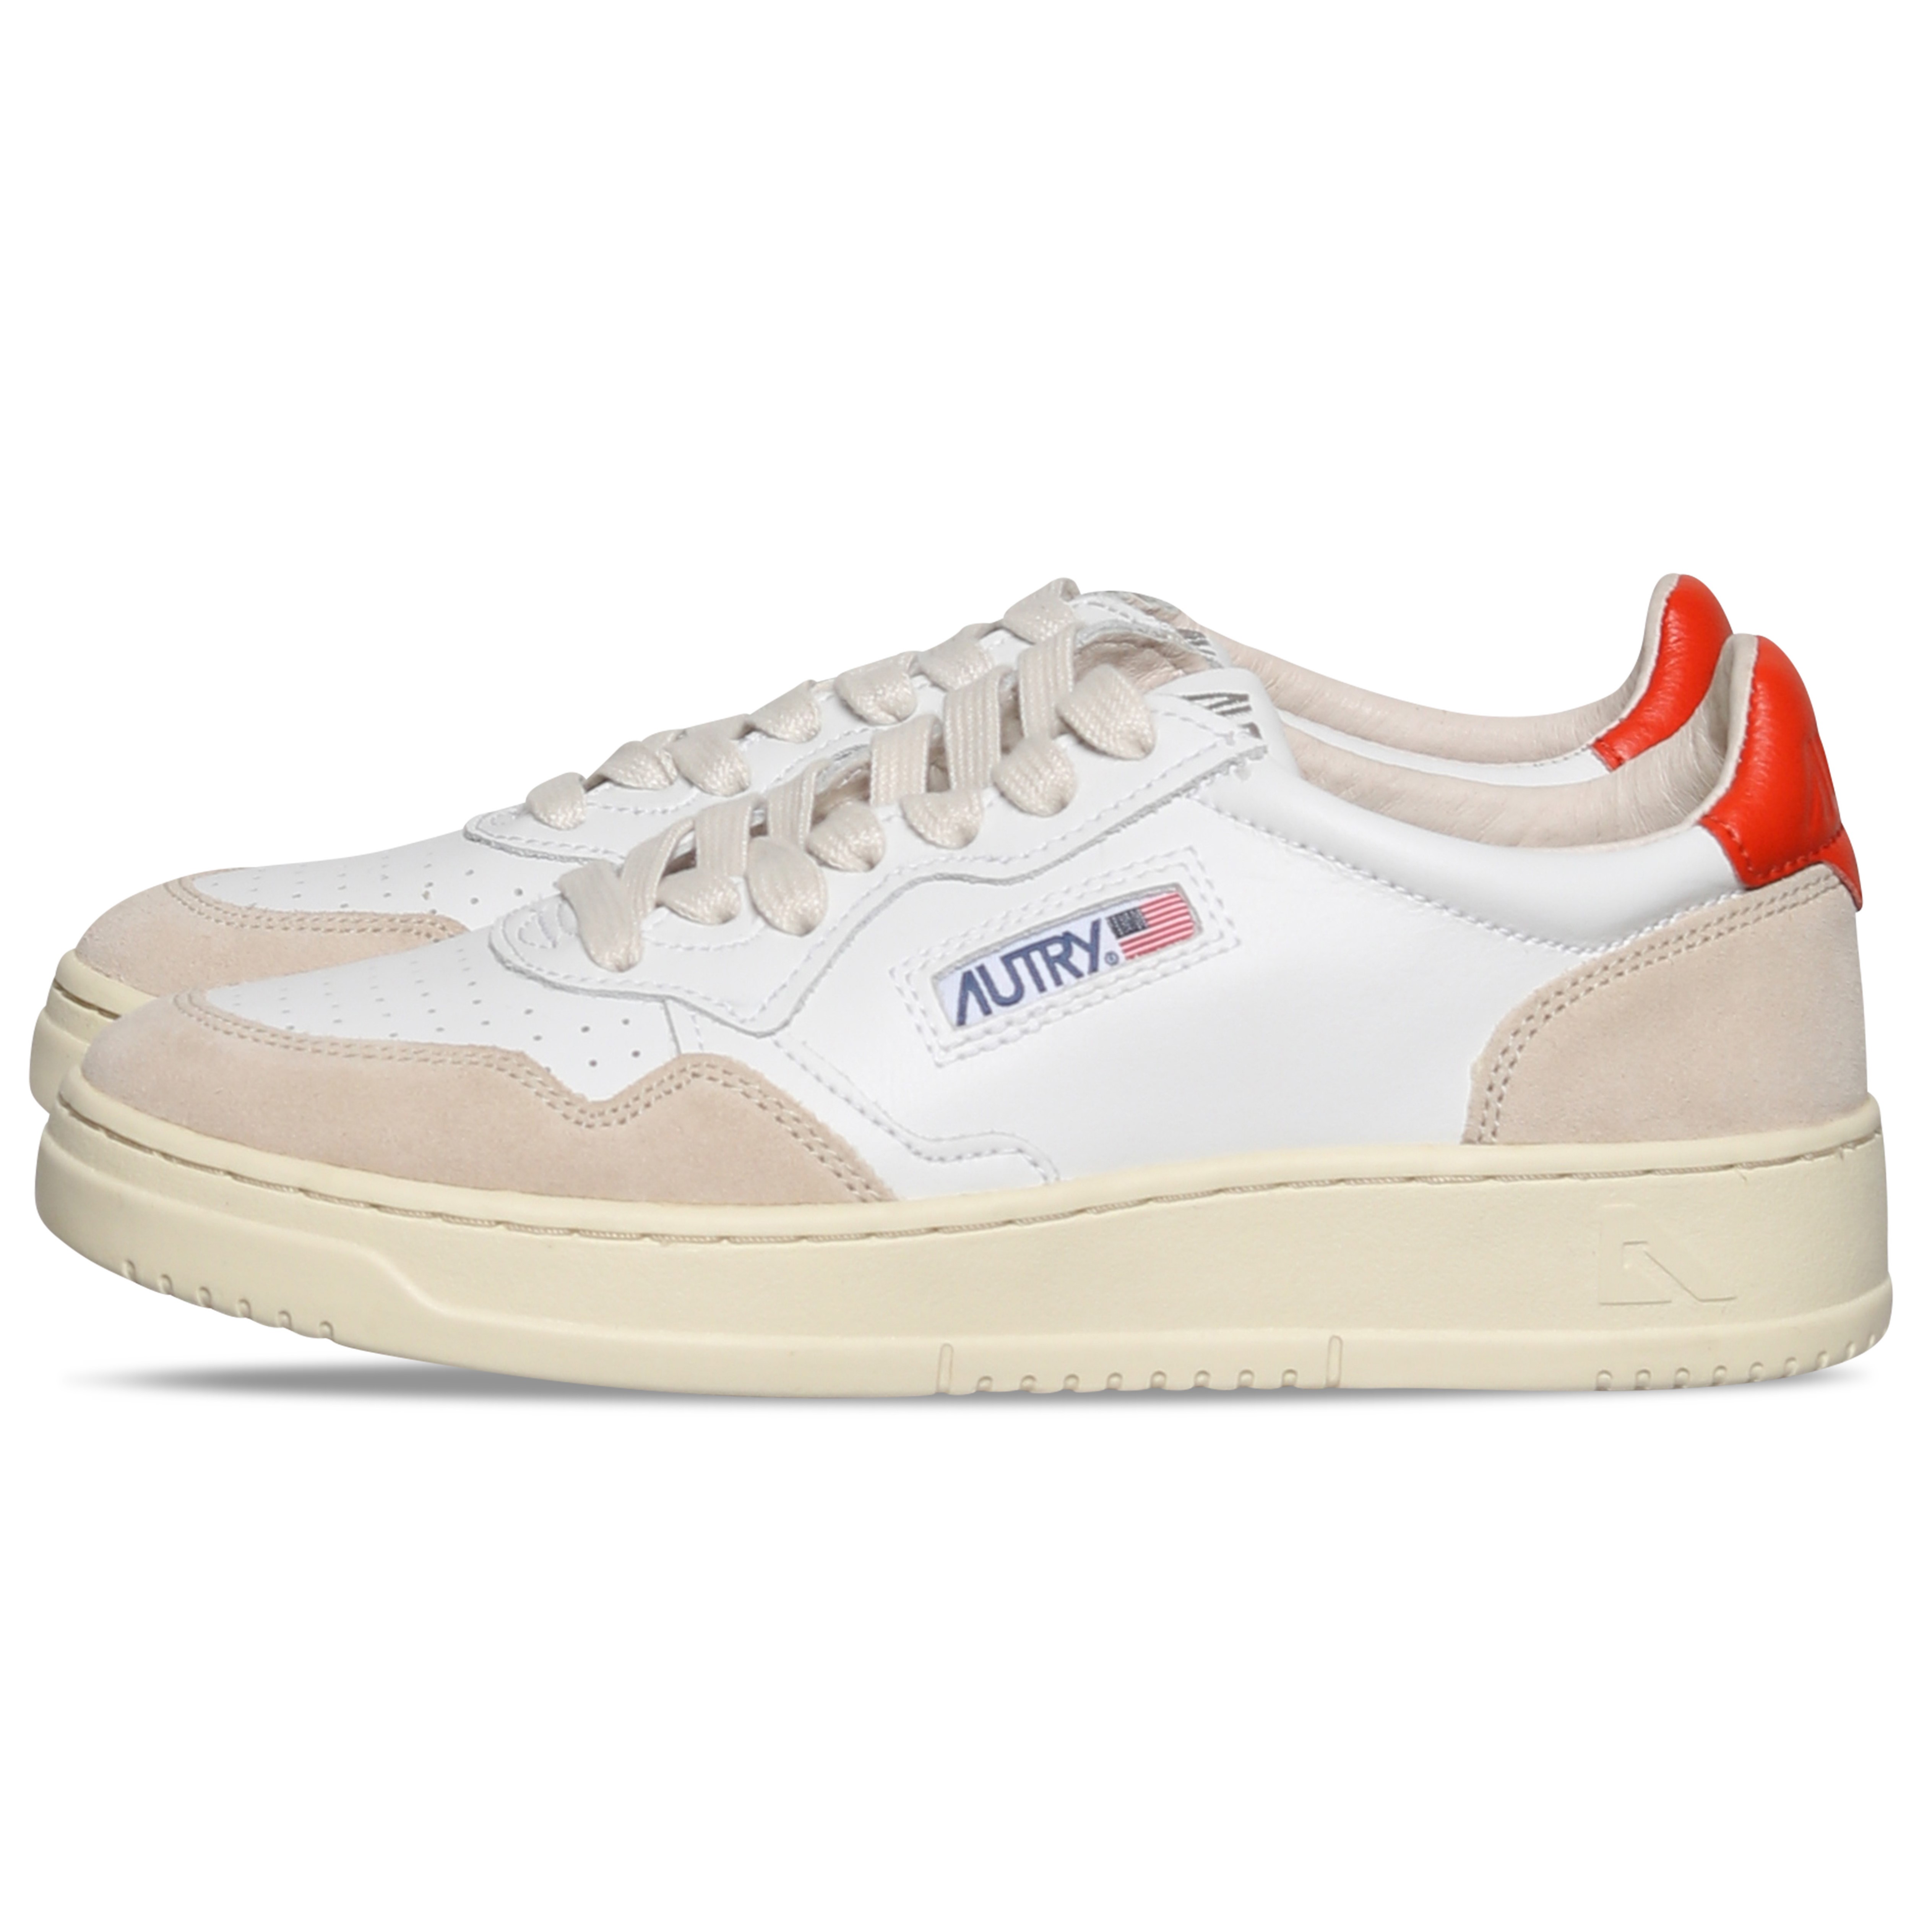 Autry Action Shoes Low Sneaker White/Suede/Orange